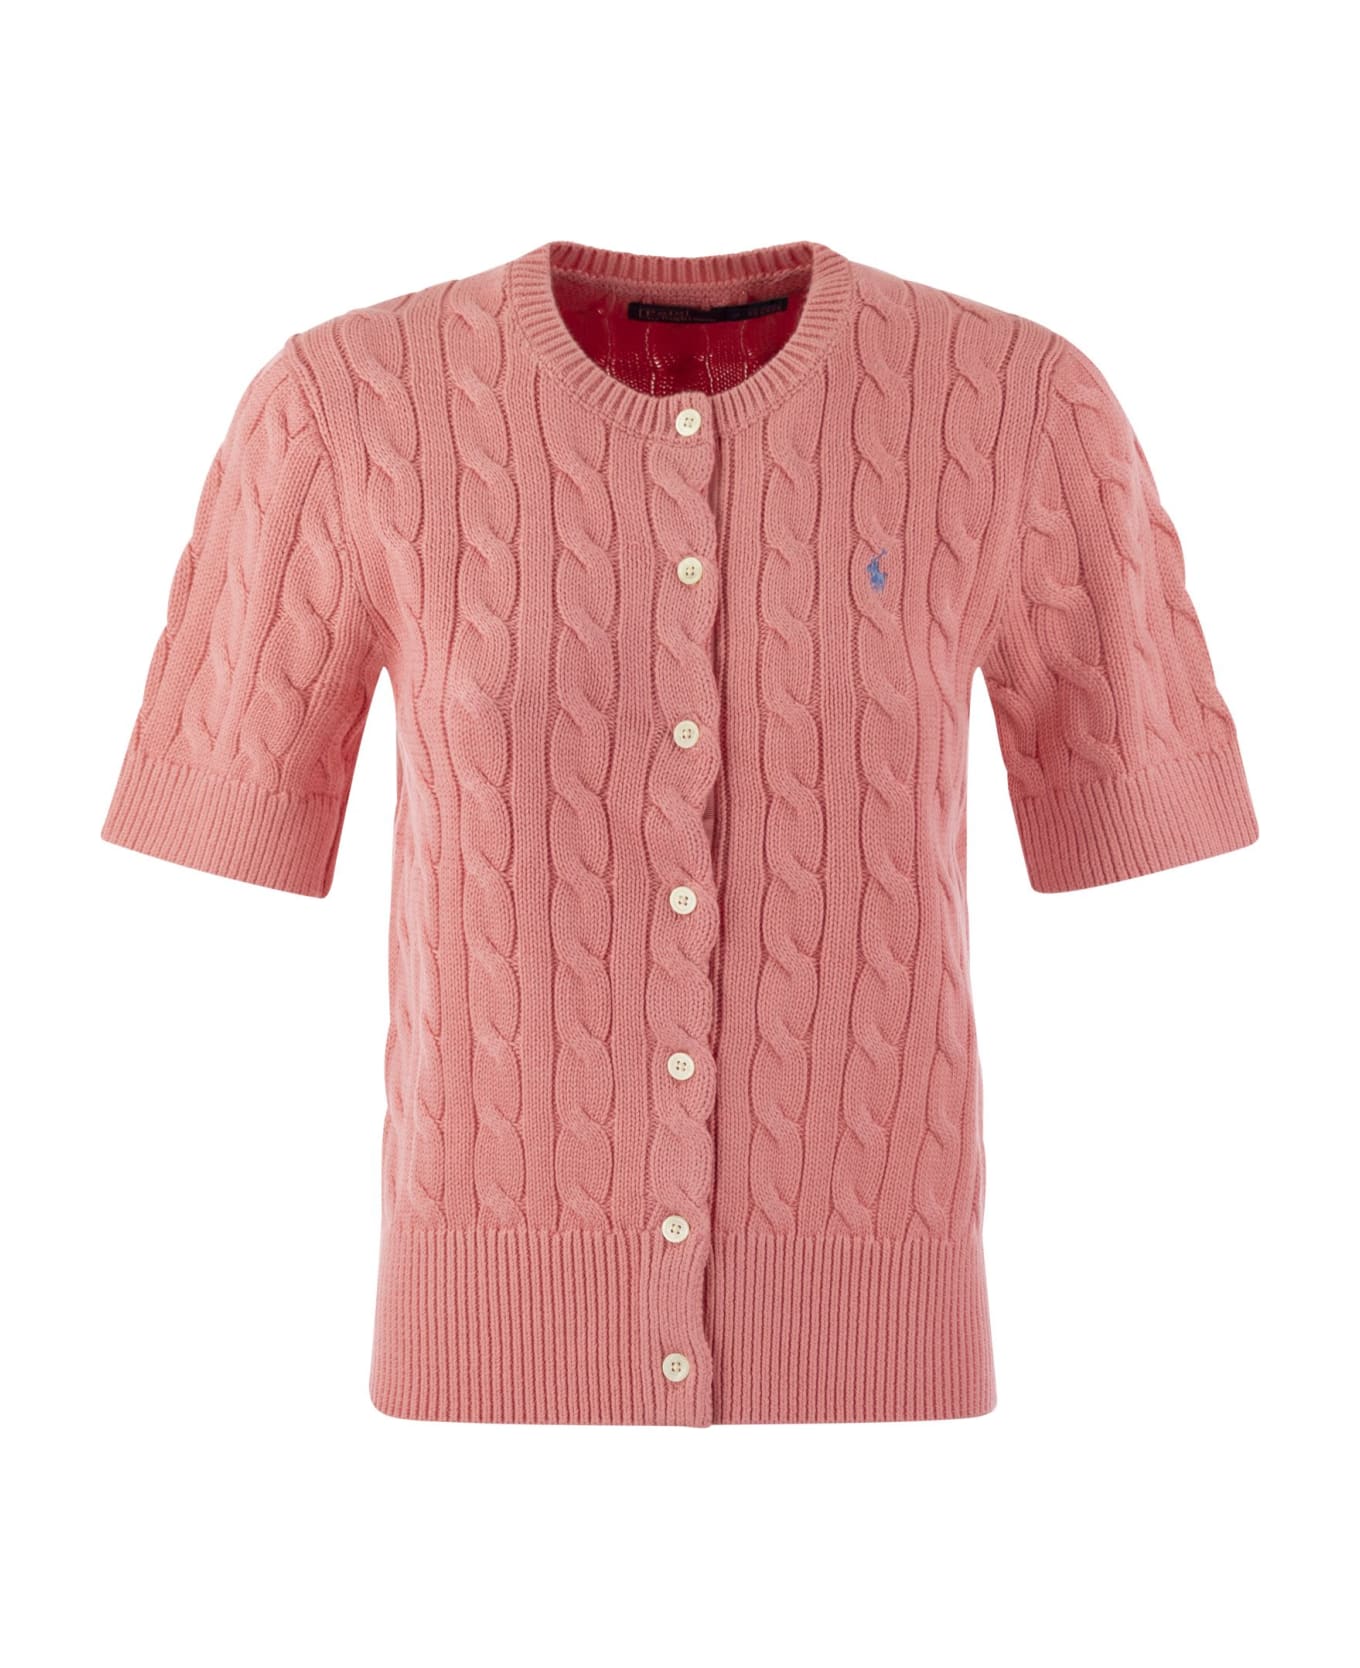 Polo Ralph Lauren Plaited Cardigan With Short Sleeves - Salmon Rose